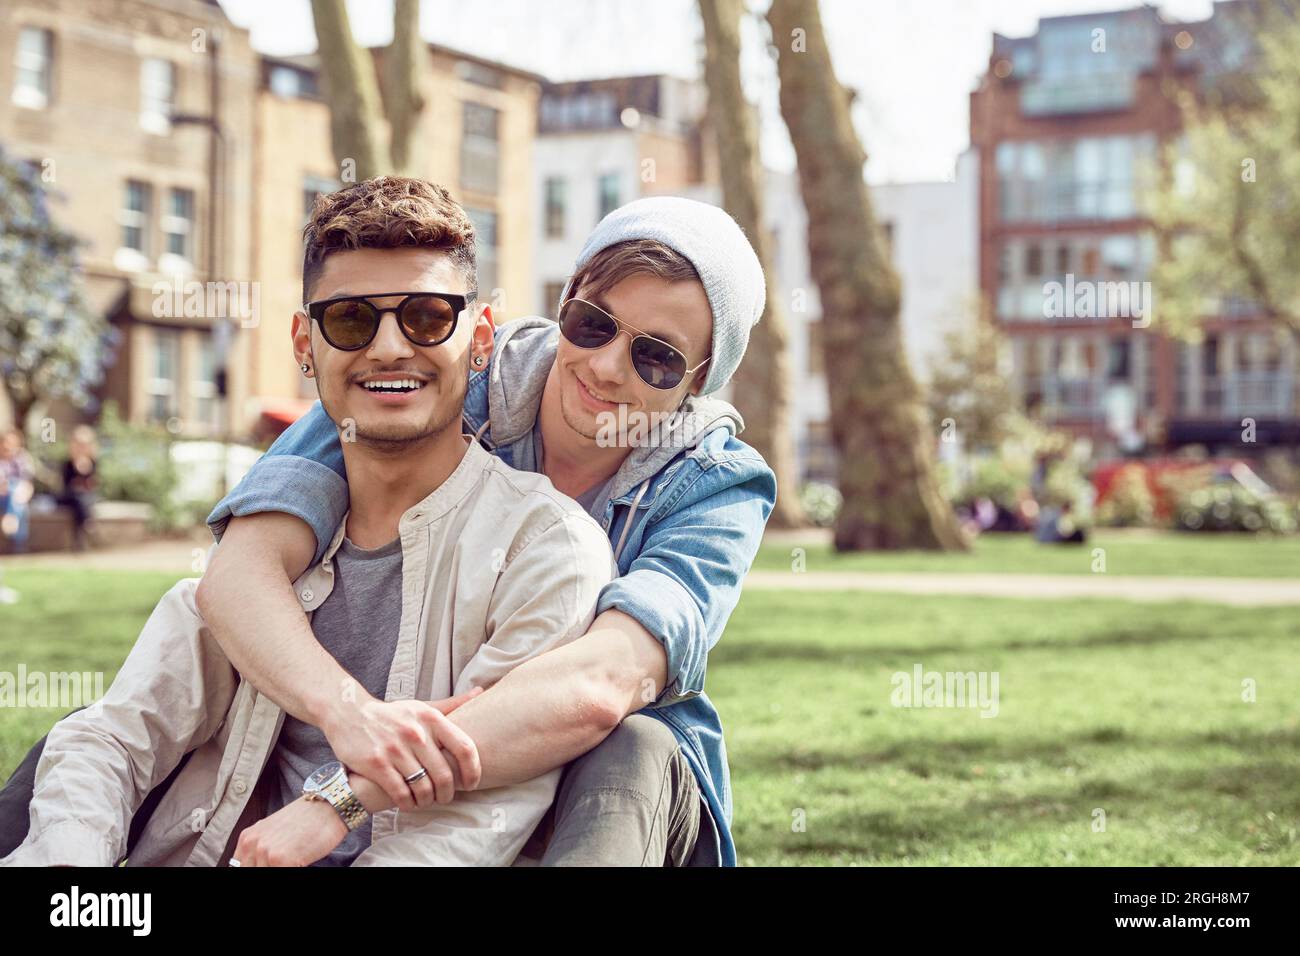 Gay teenage couple sitting together in park Stock Photo